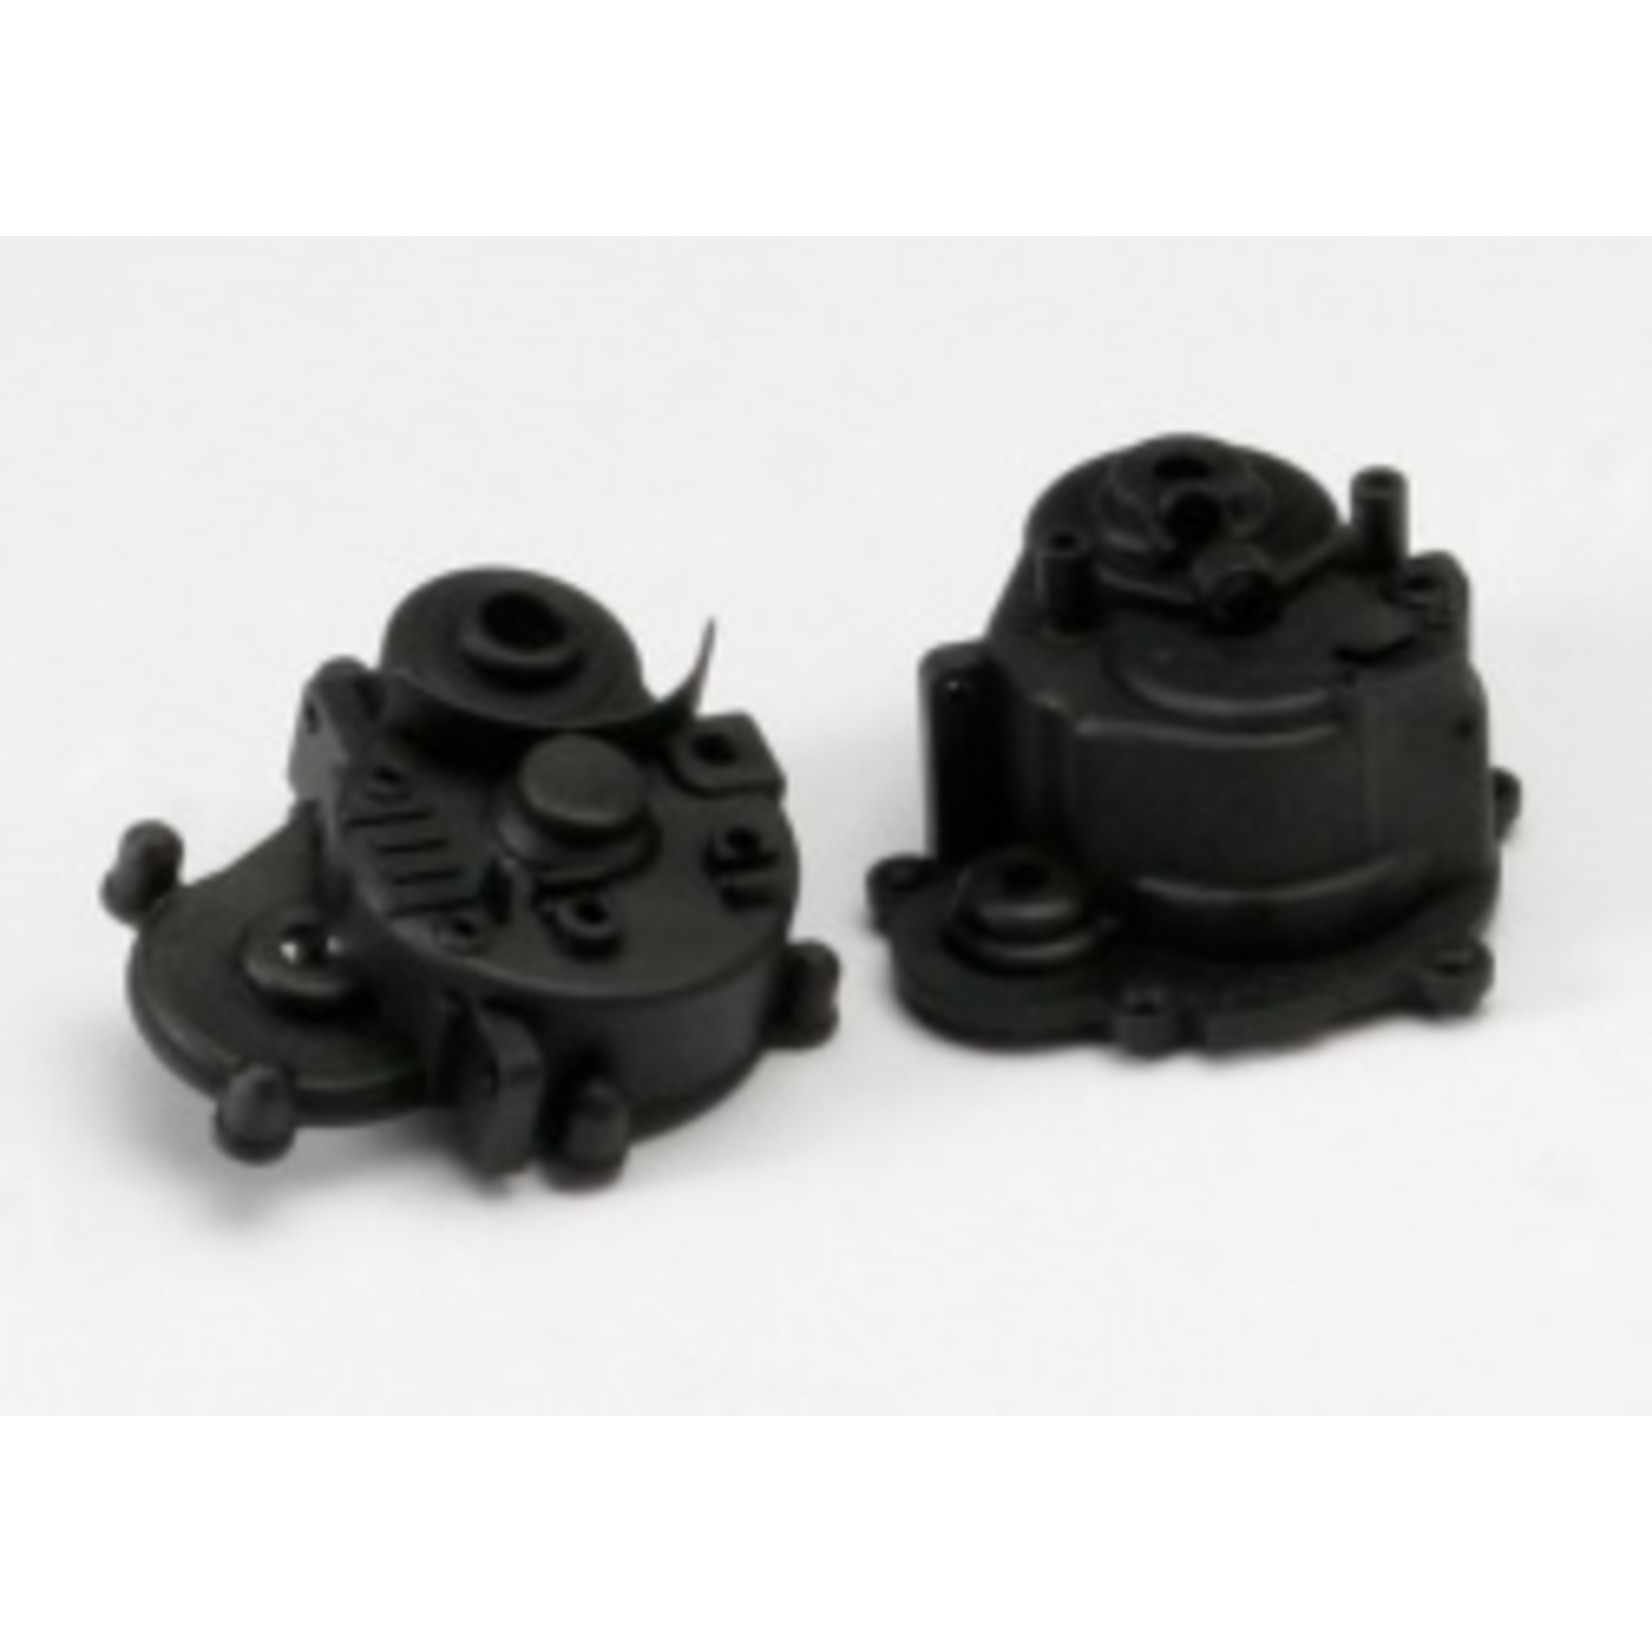 Traxxas Gearbox halves (front & rear)/ rubber access plug/ shift detent ball/ spring/ 4mm GS/ shift shaft seal, glued